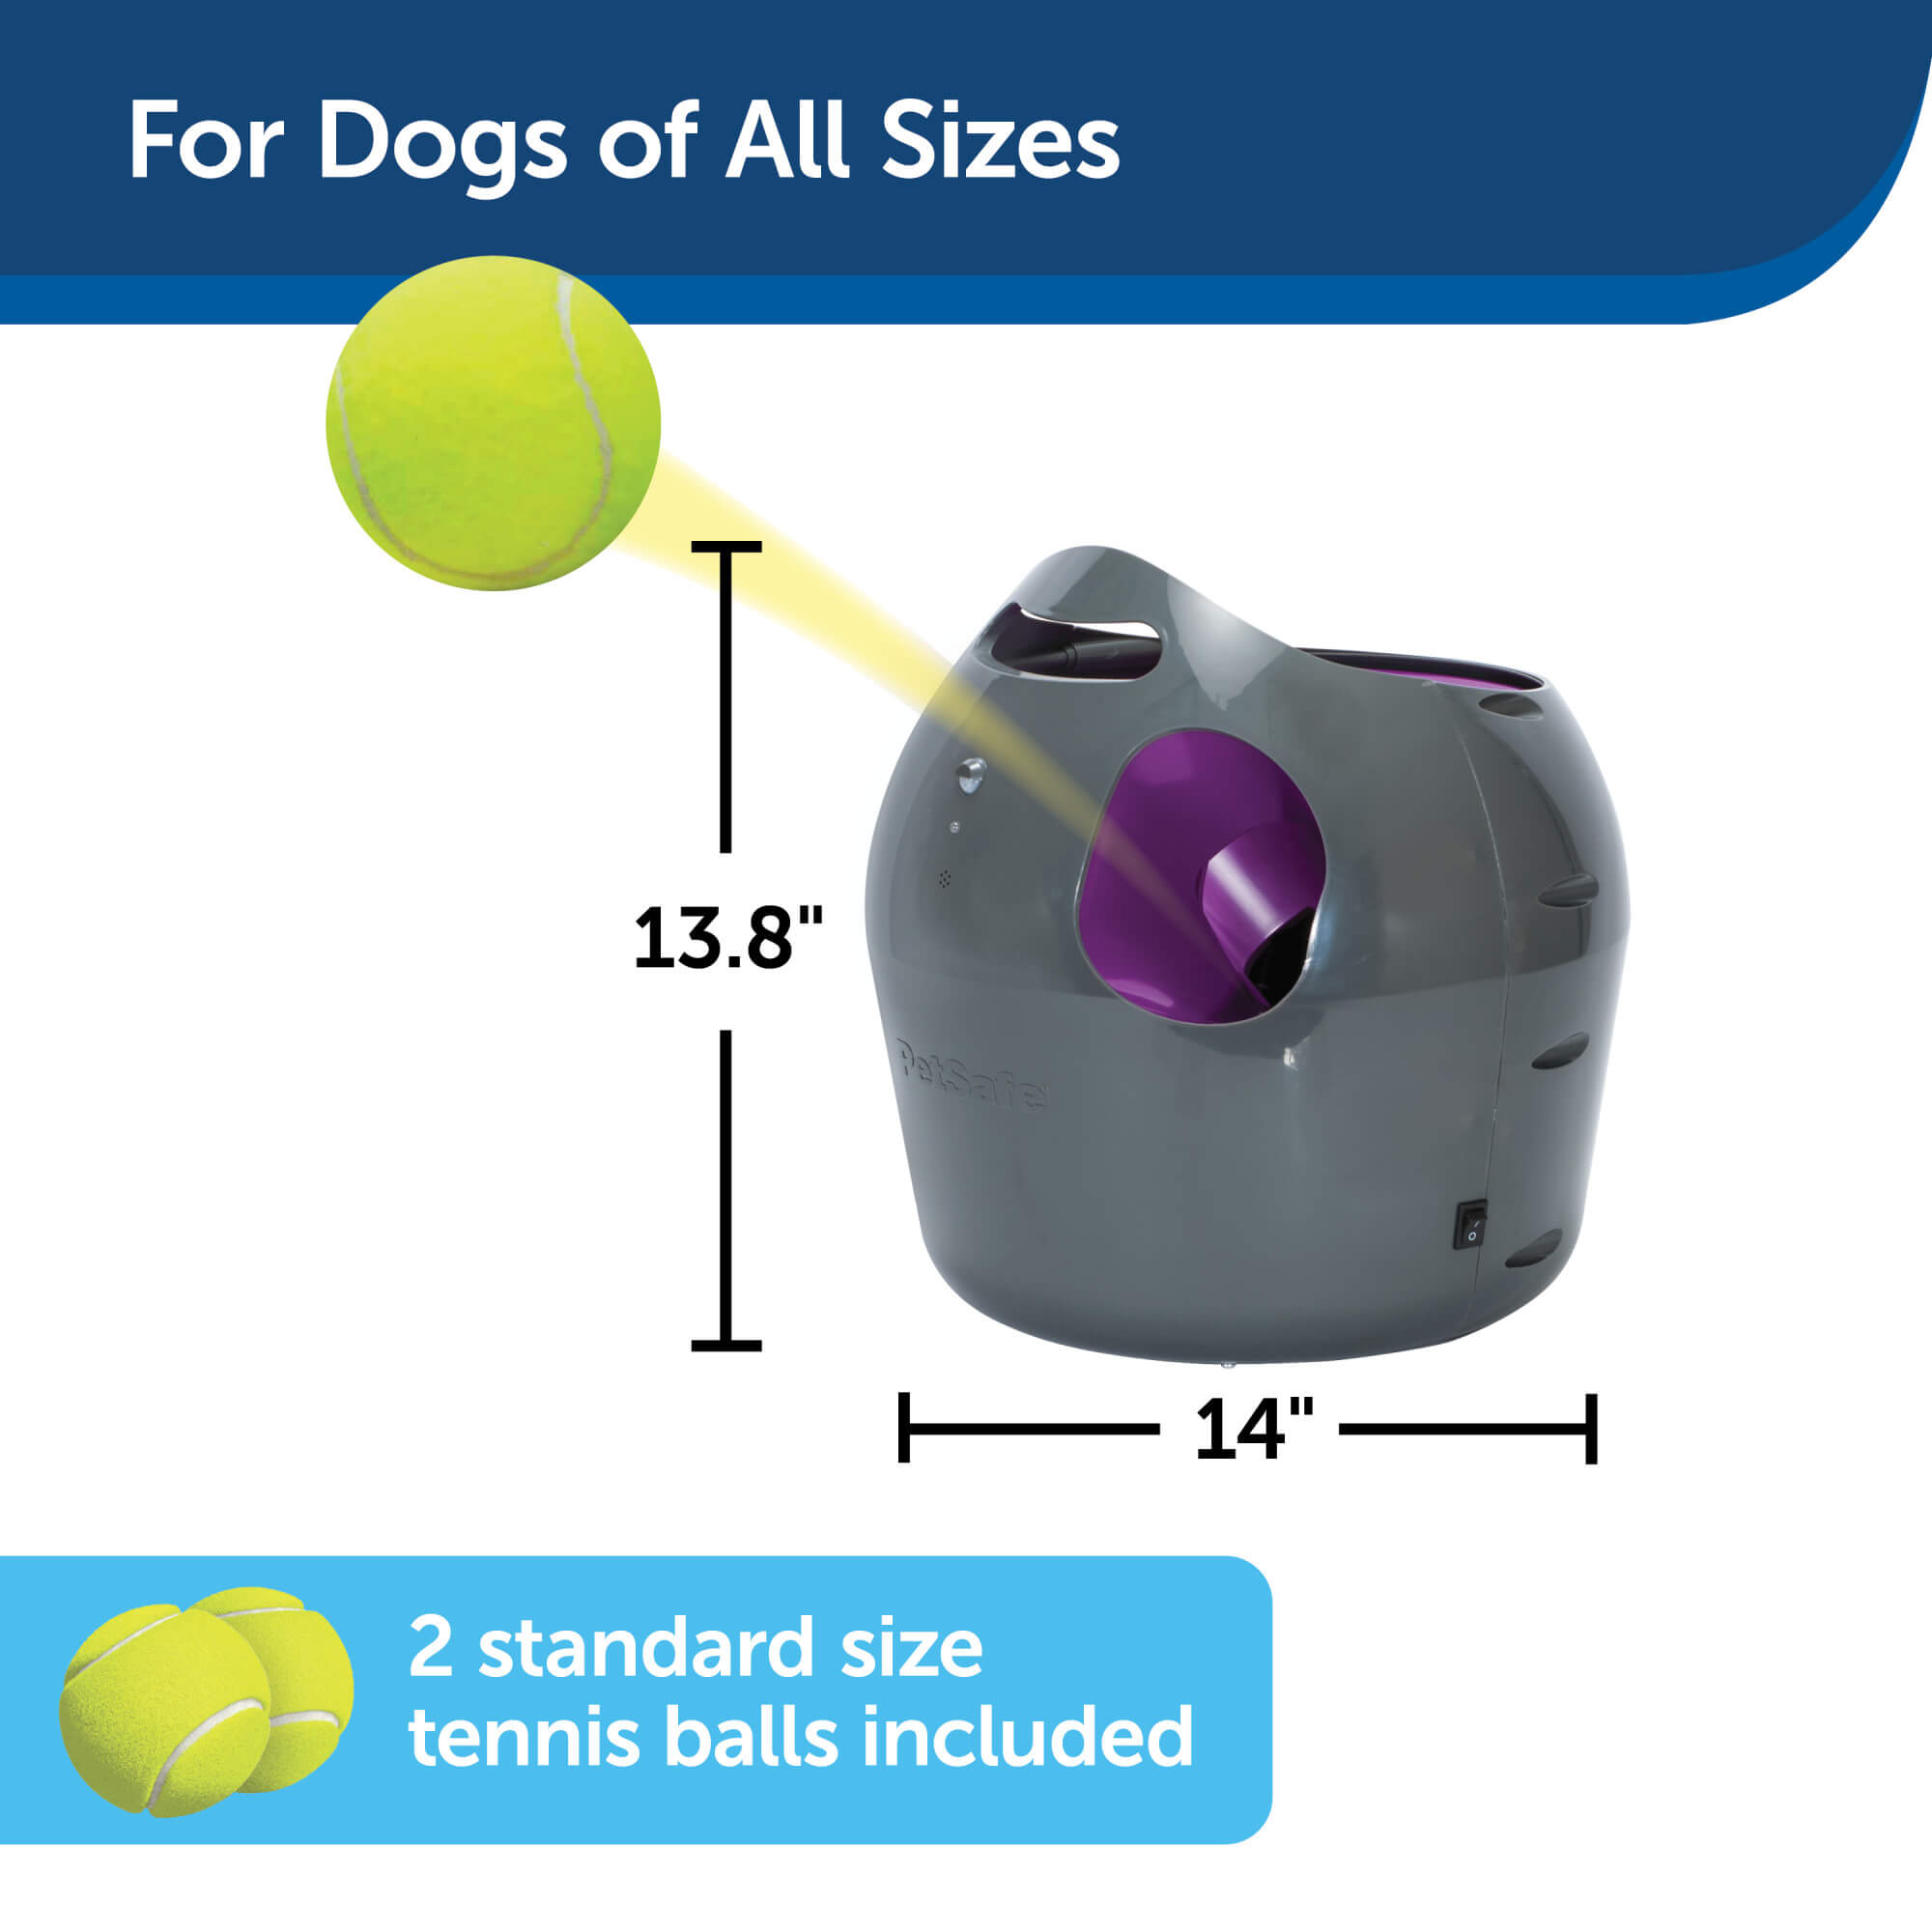 For dogs of all sizes